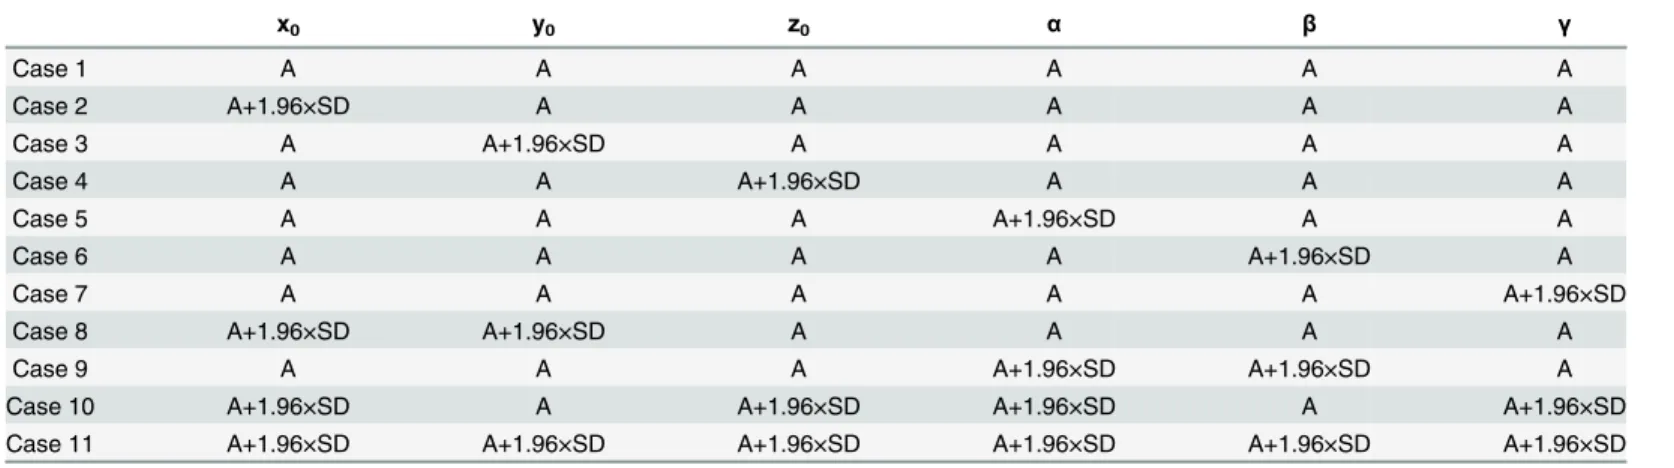 Table 1. Pre-set misalignment components used in 11 cases considered in the validation study.